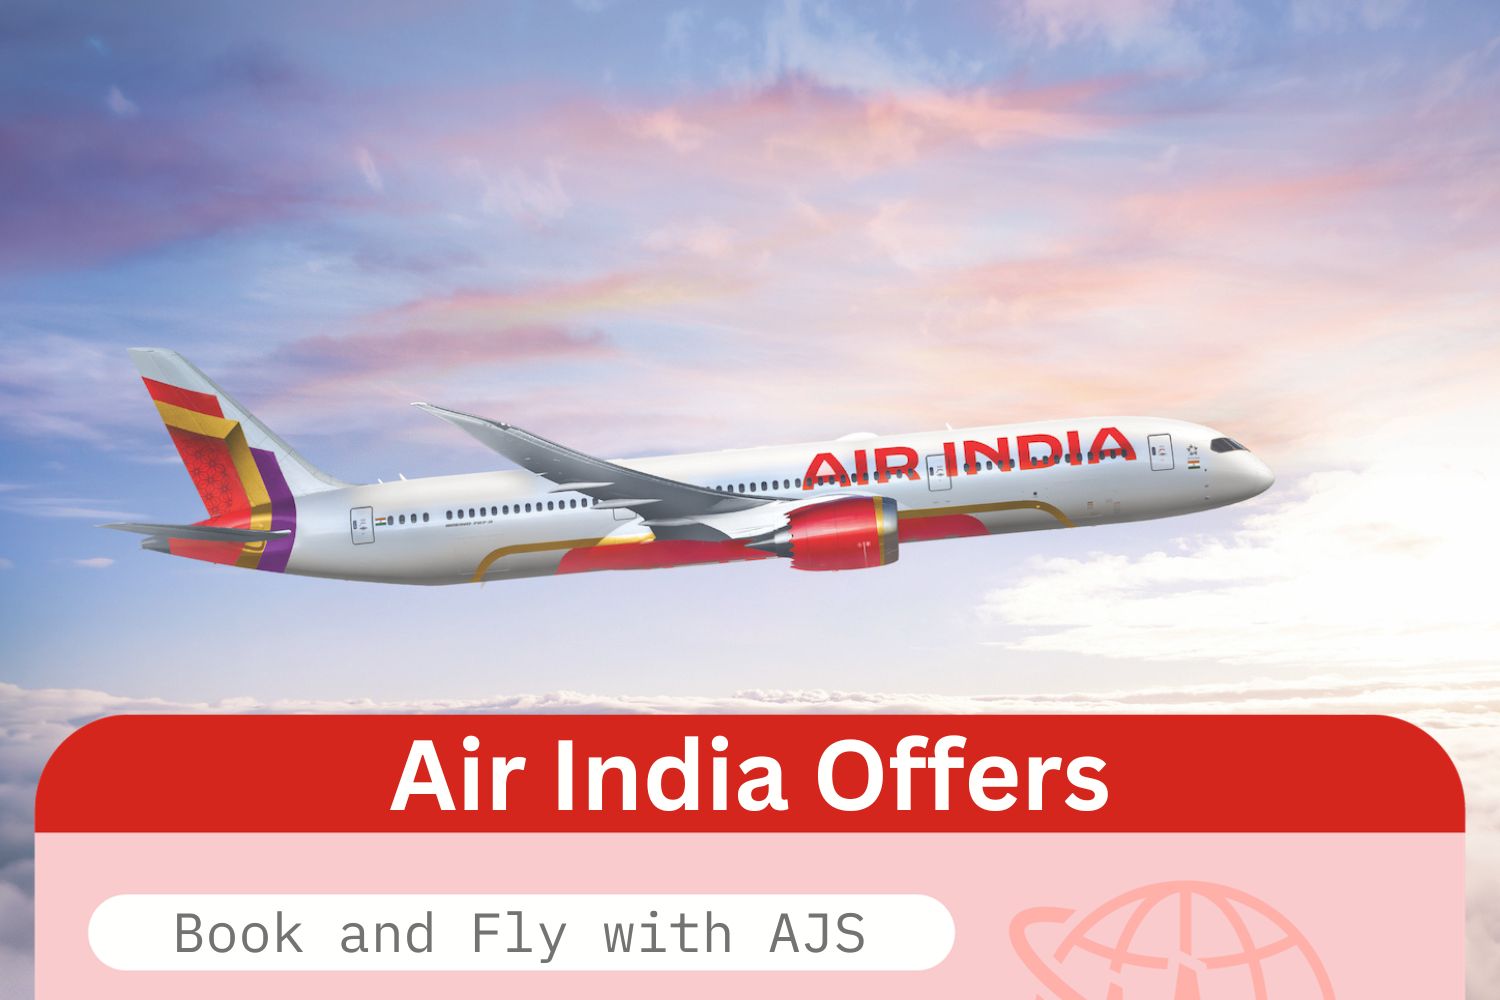 Air India Offers AJS Travels